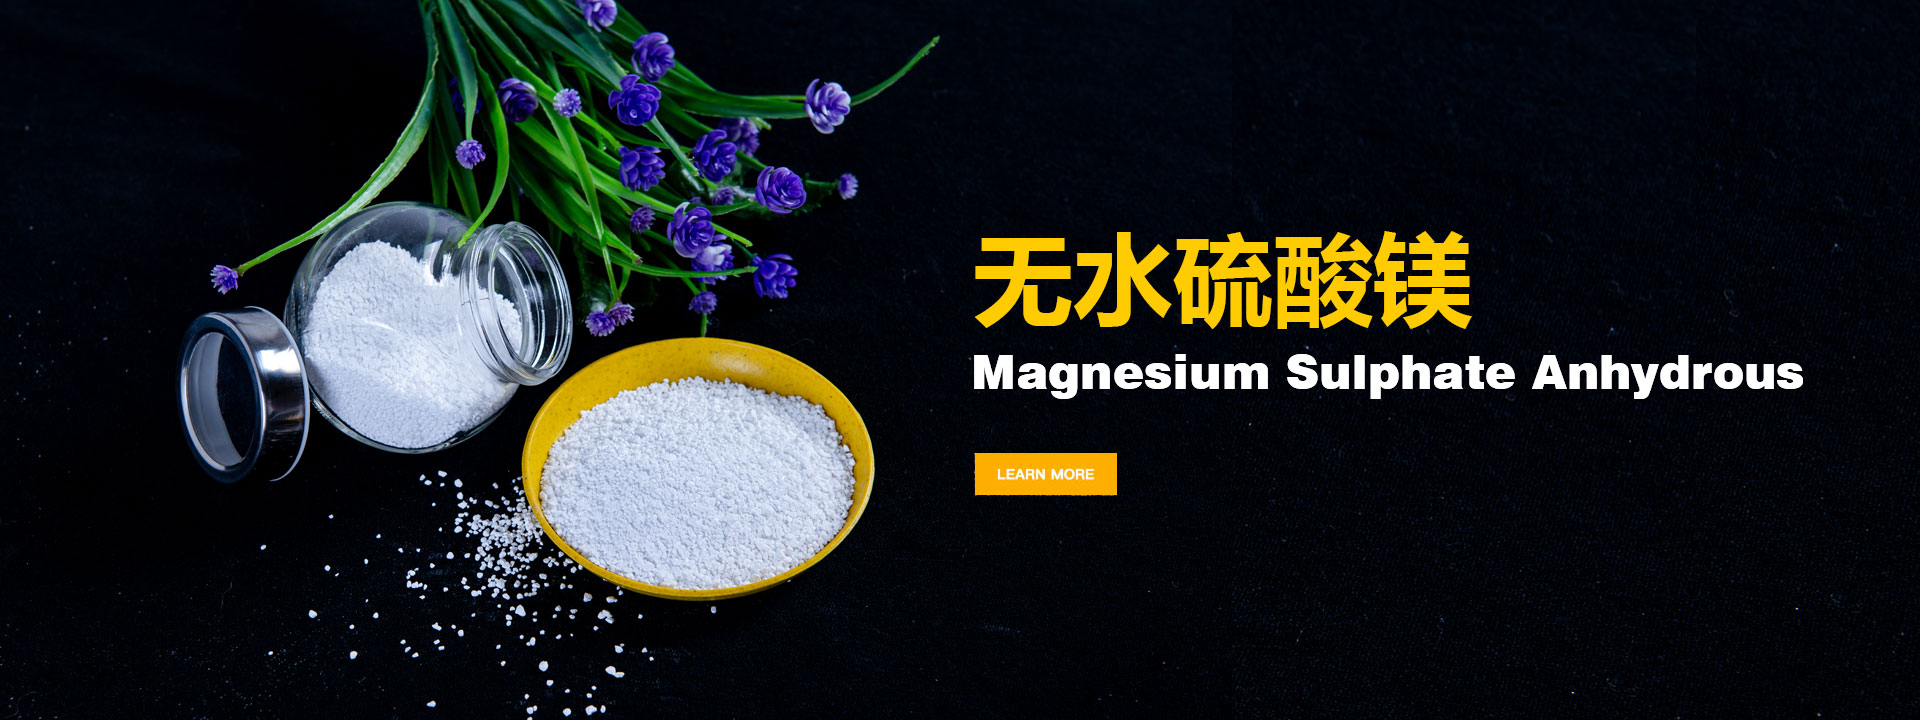 Magnesium Sulphate  Anhydrous